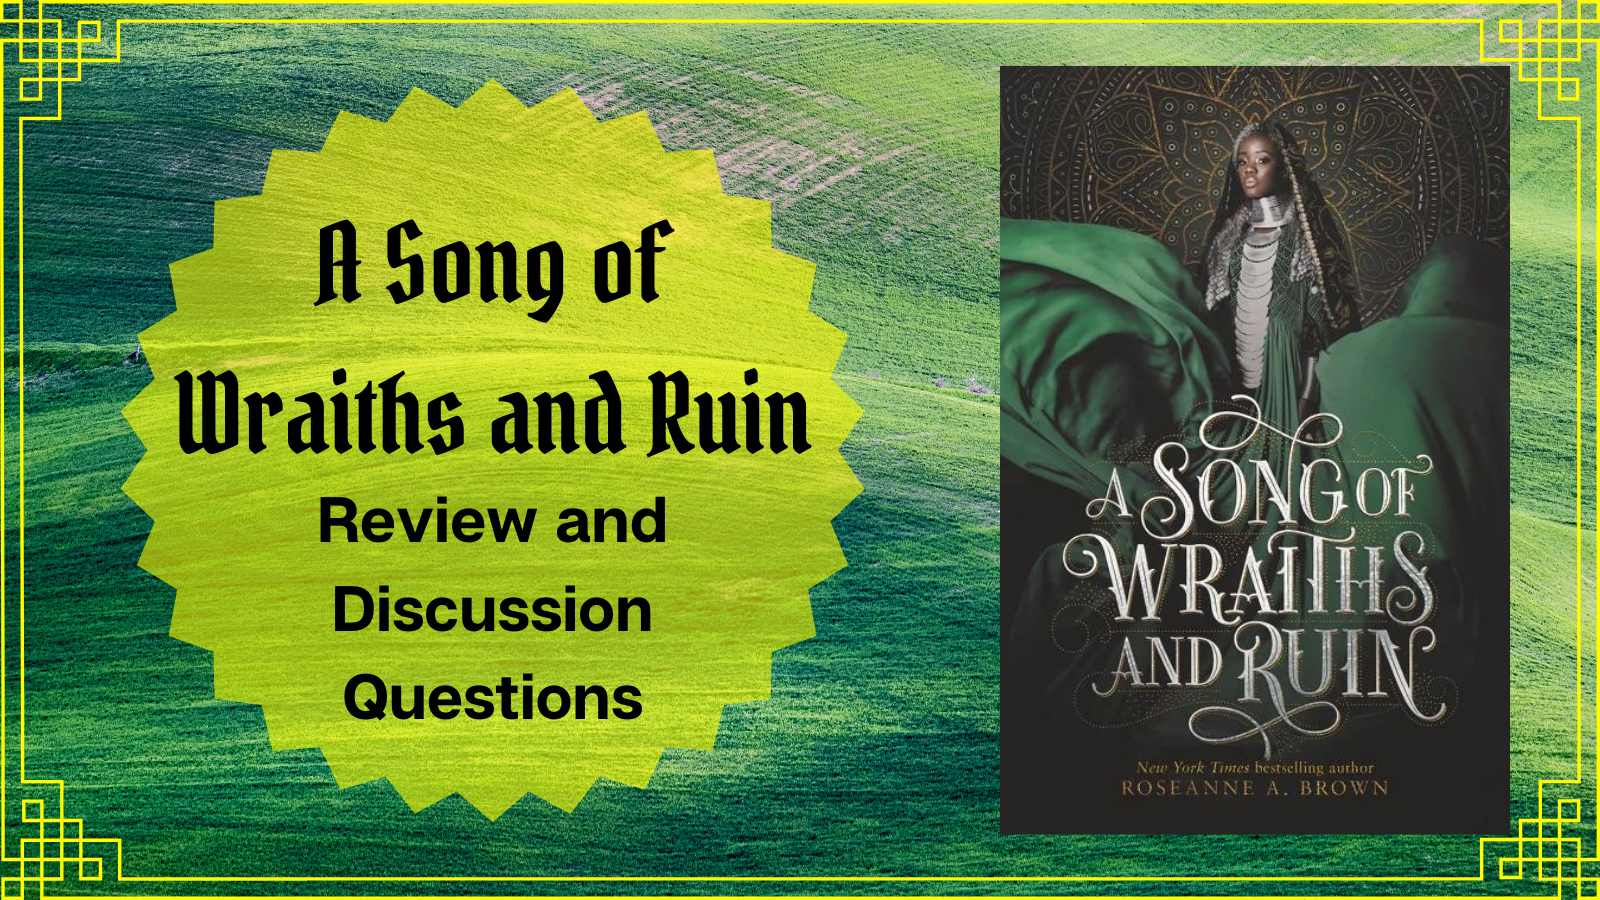 A Song of Wraiths and Ruin review